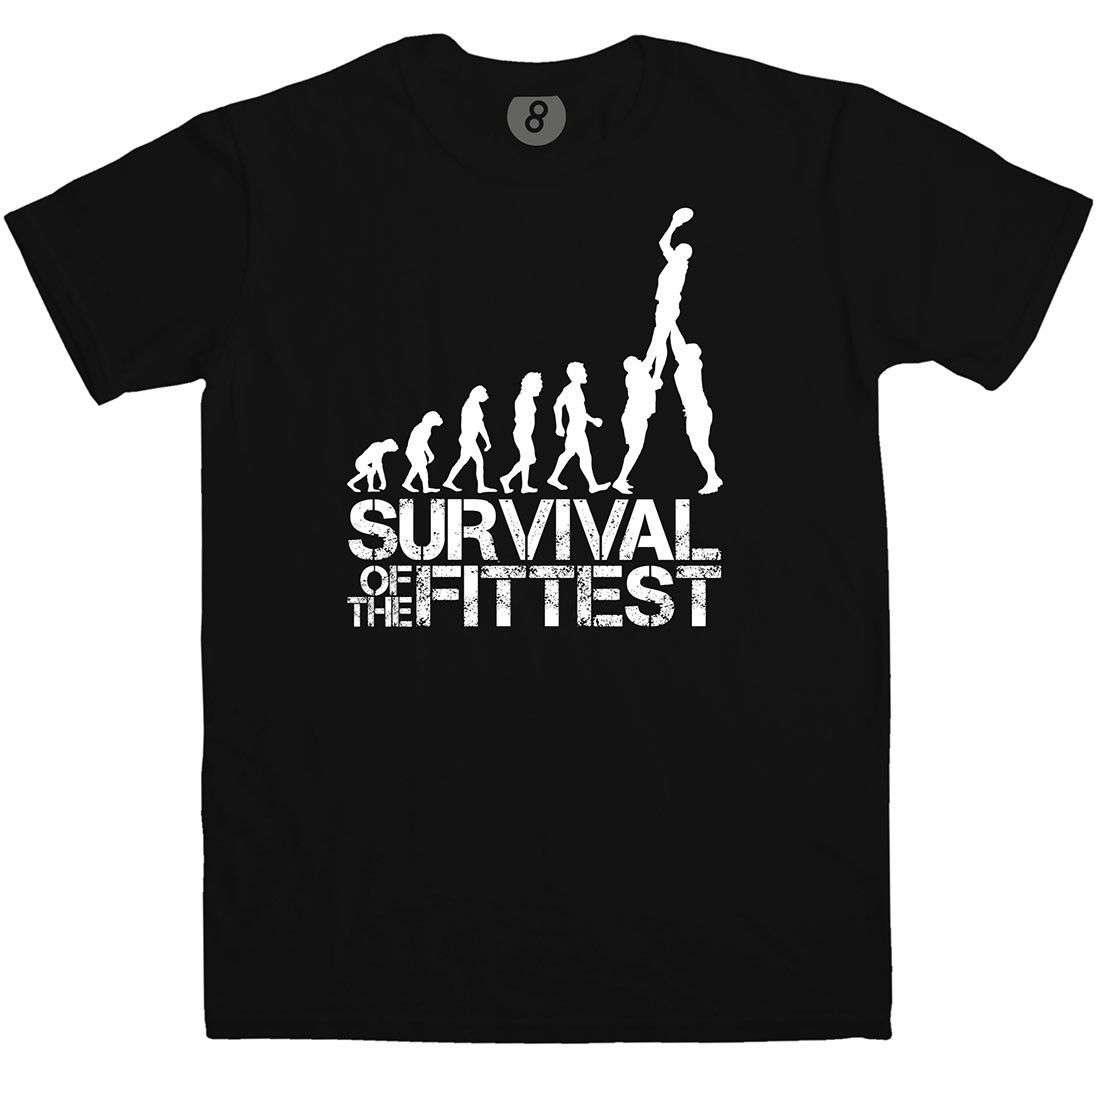 Survival of the Fittest Rugby Evolution Unisex T-Shirt For Men And Women 8Ball